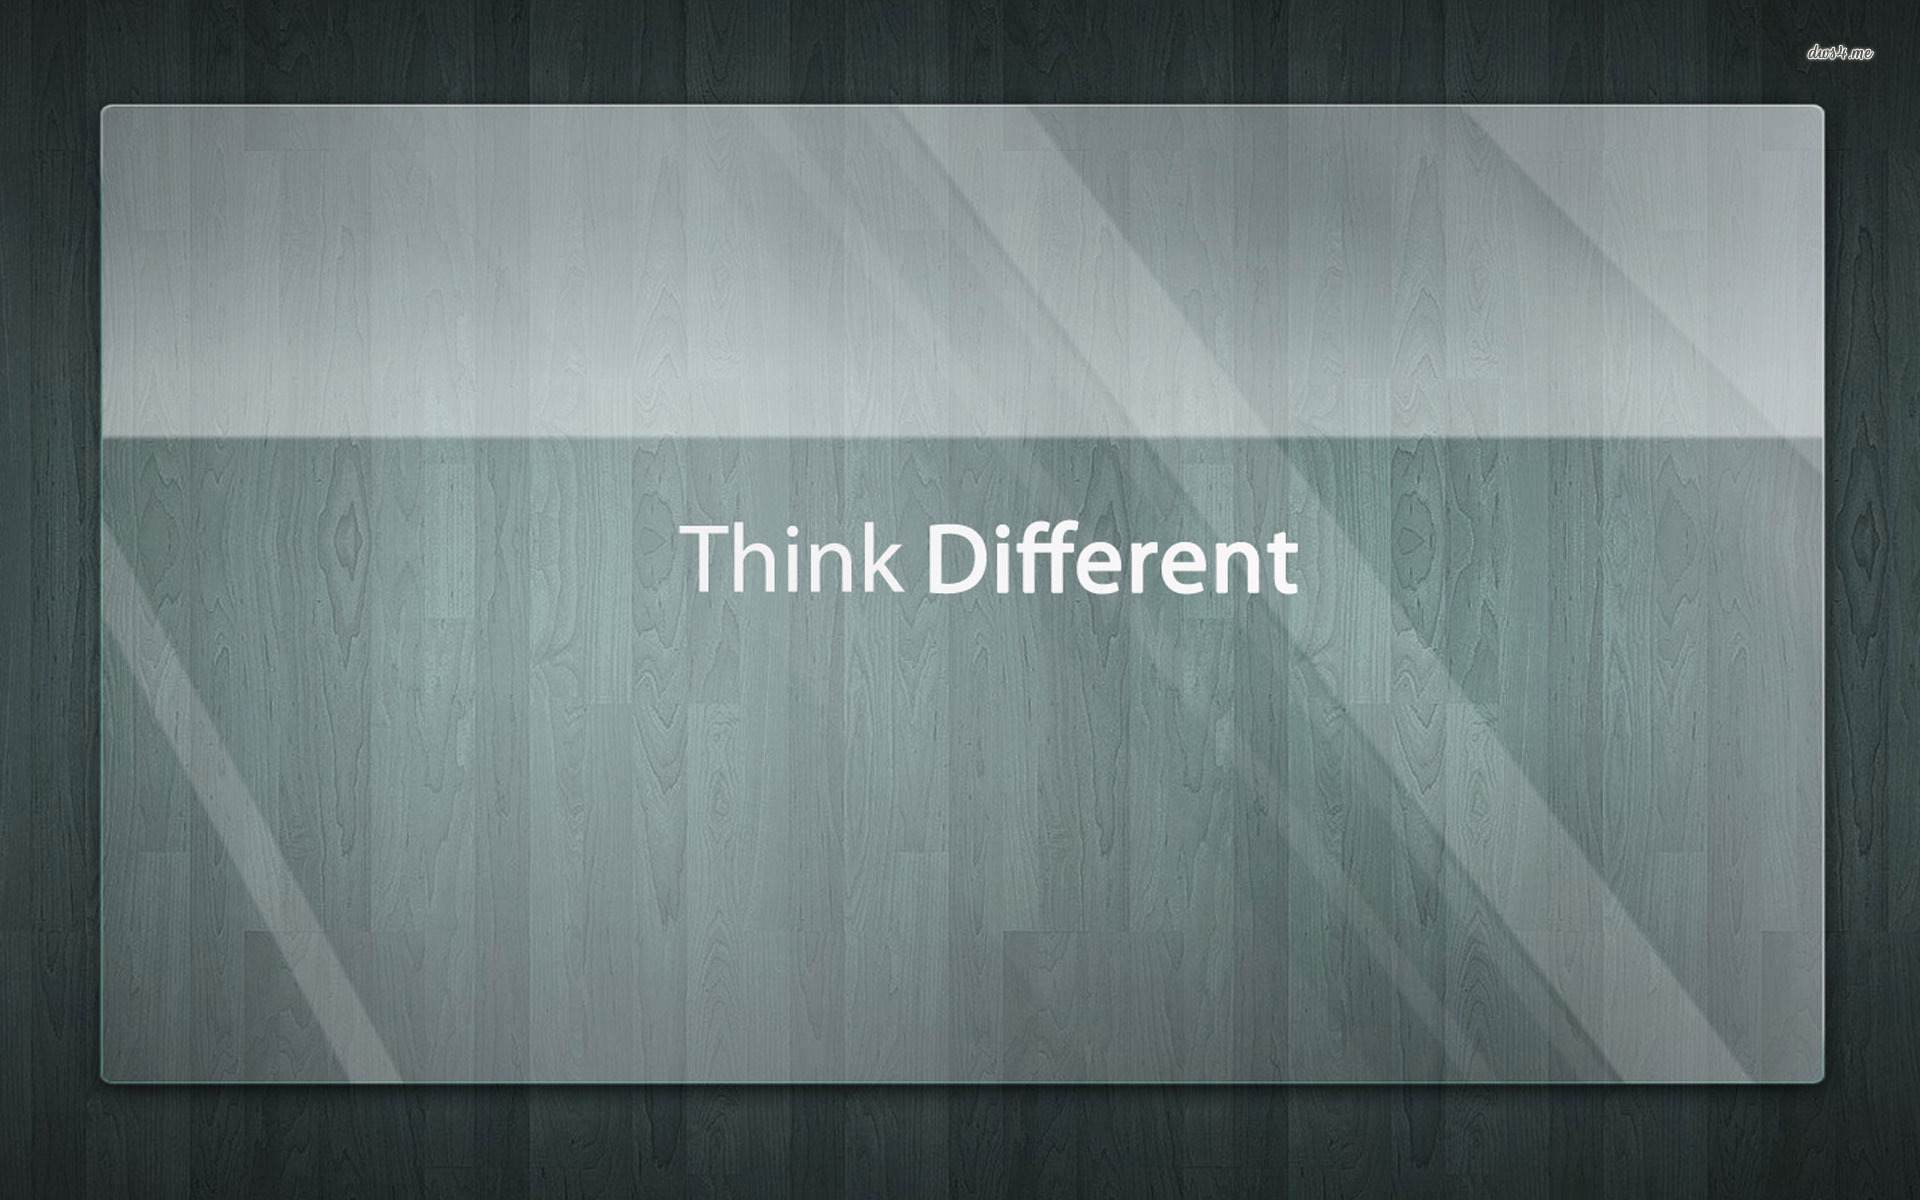 Think Different - HD Wallpaper 